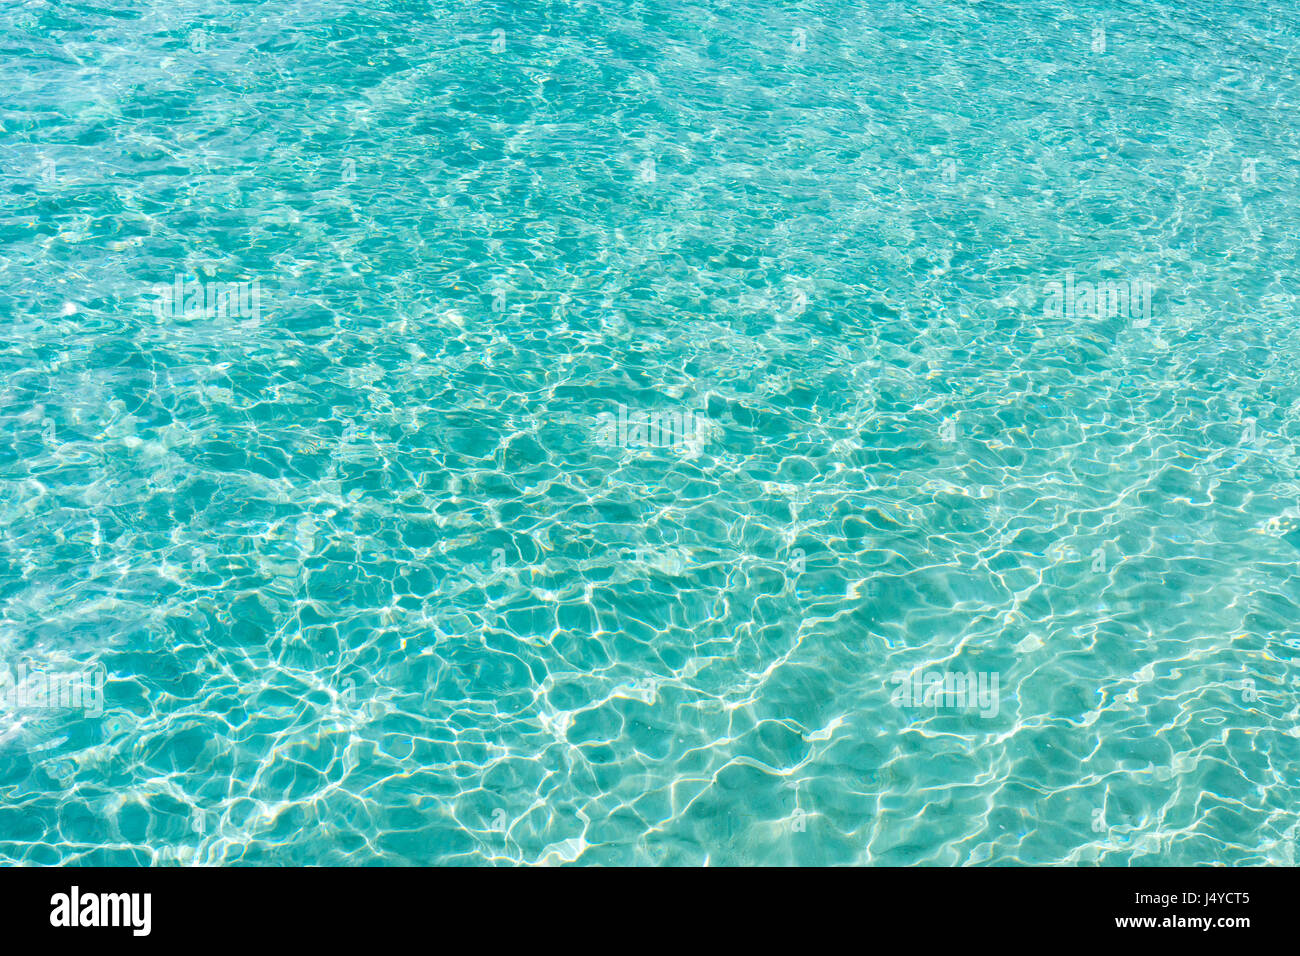 sea or ocean with transparent blue water Stock Photo